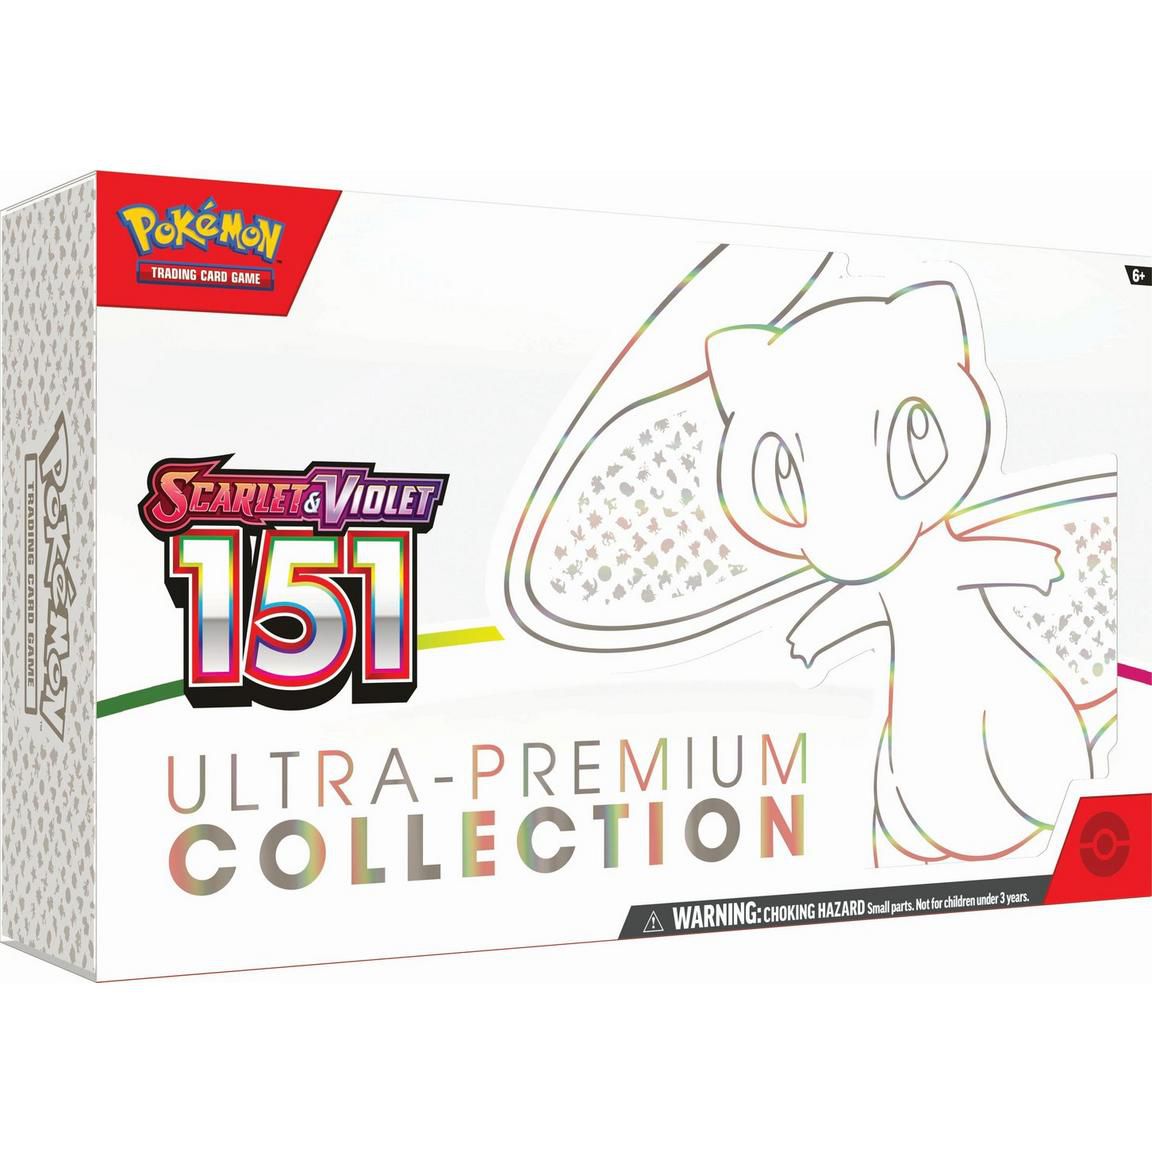 A large box of Pokémon Scarlet and Violet: 151 Collection TCG with Mew presented on the front